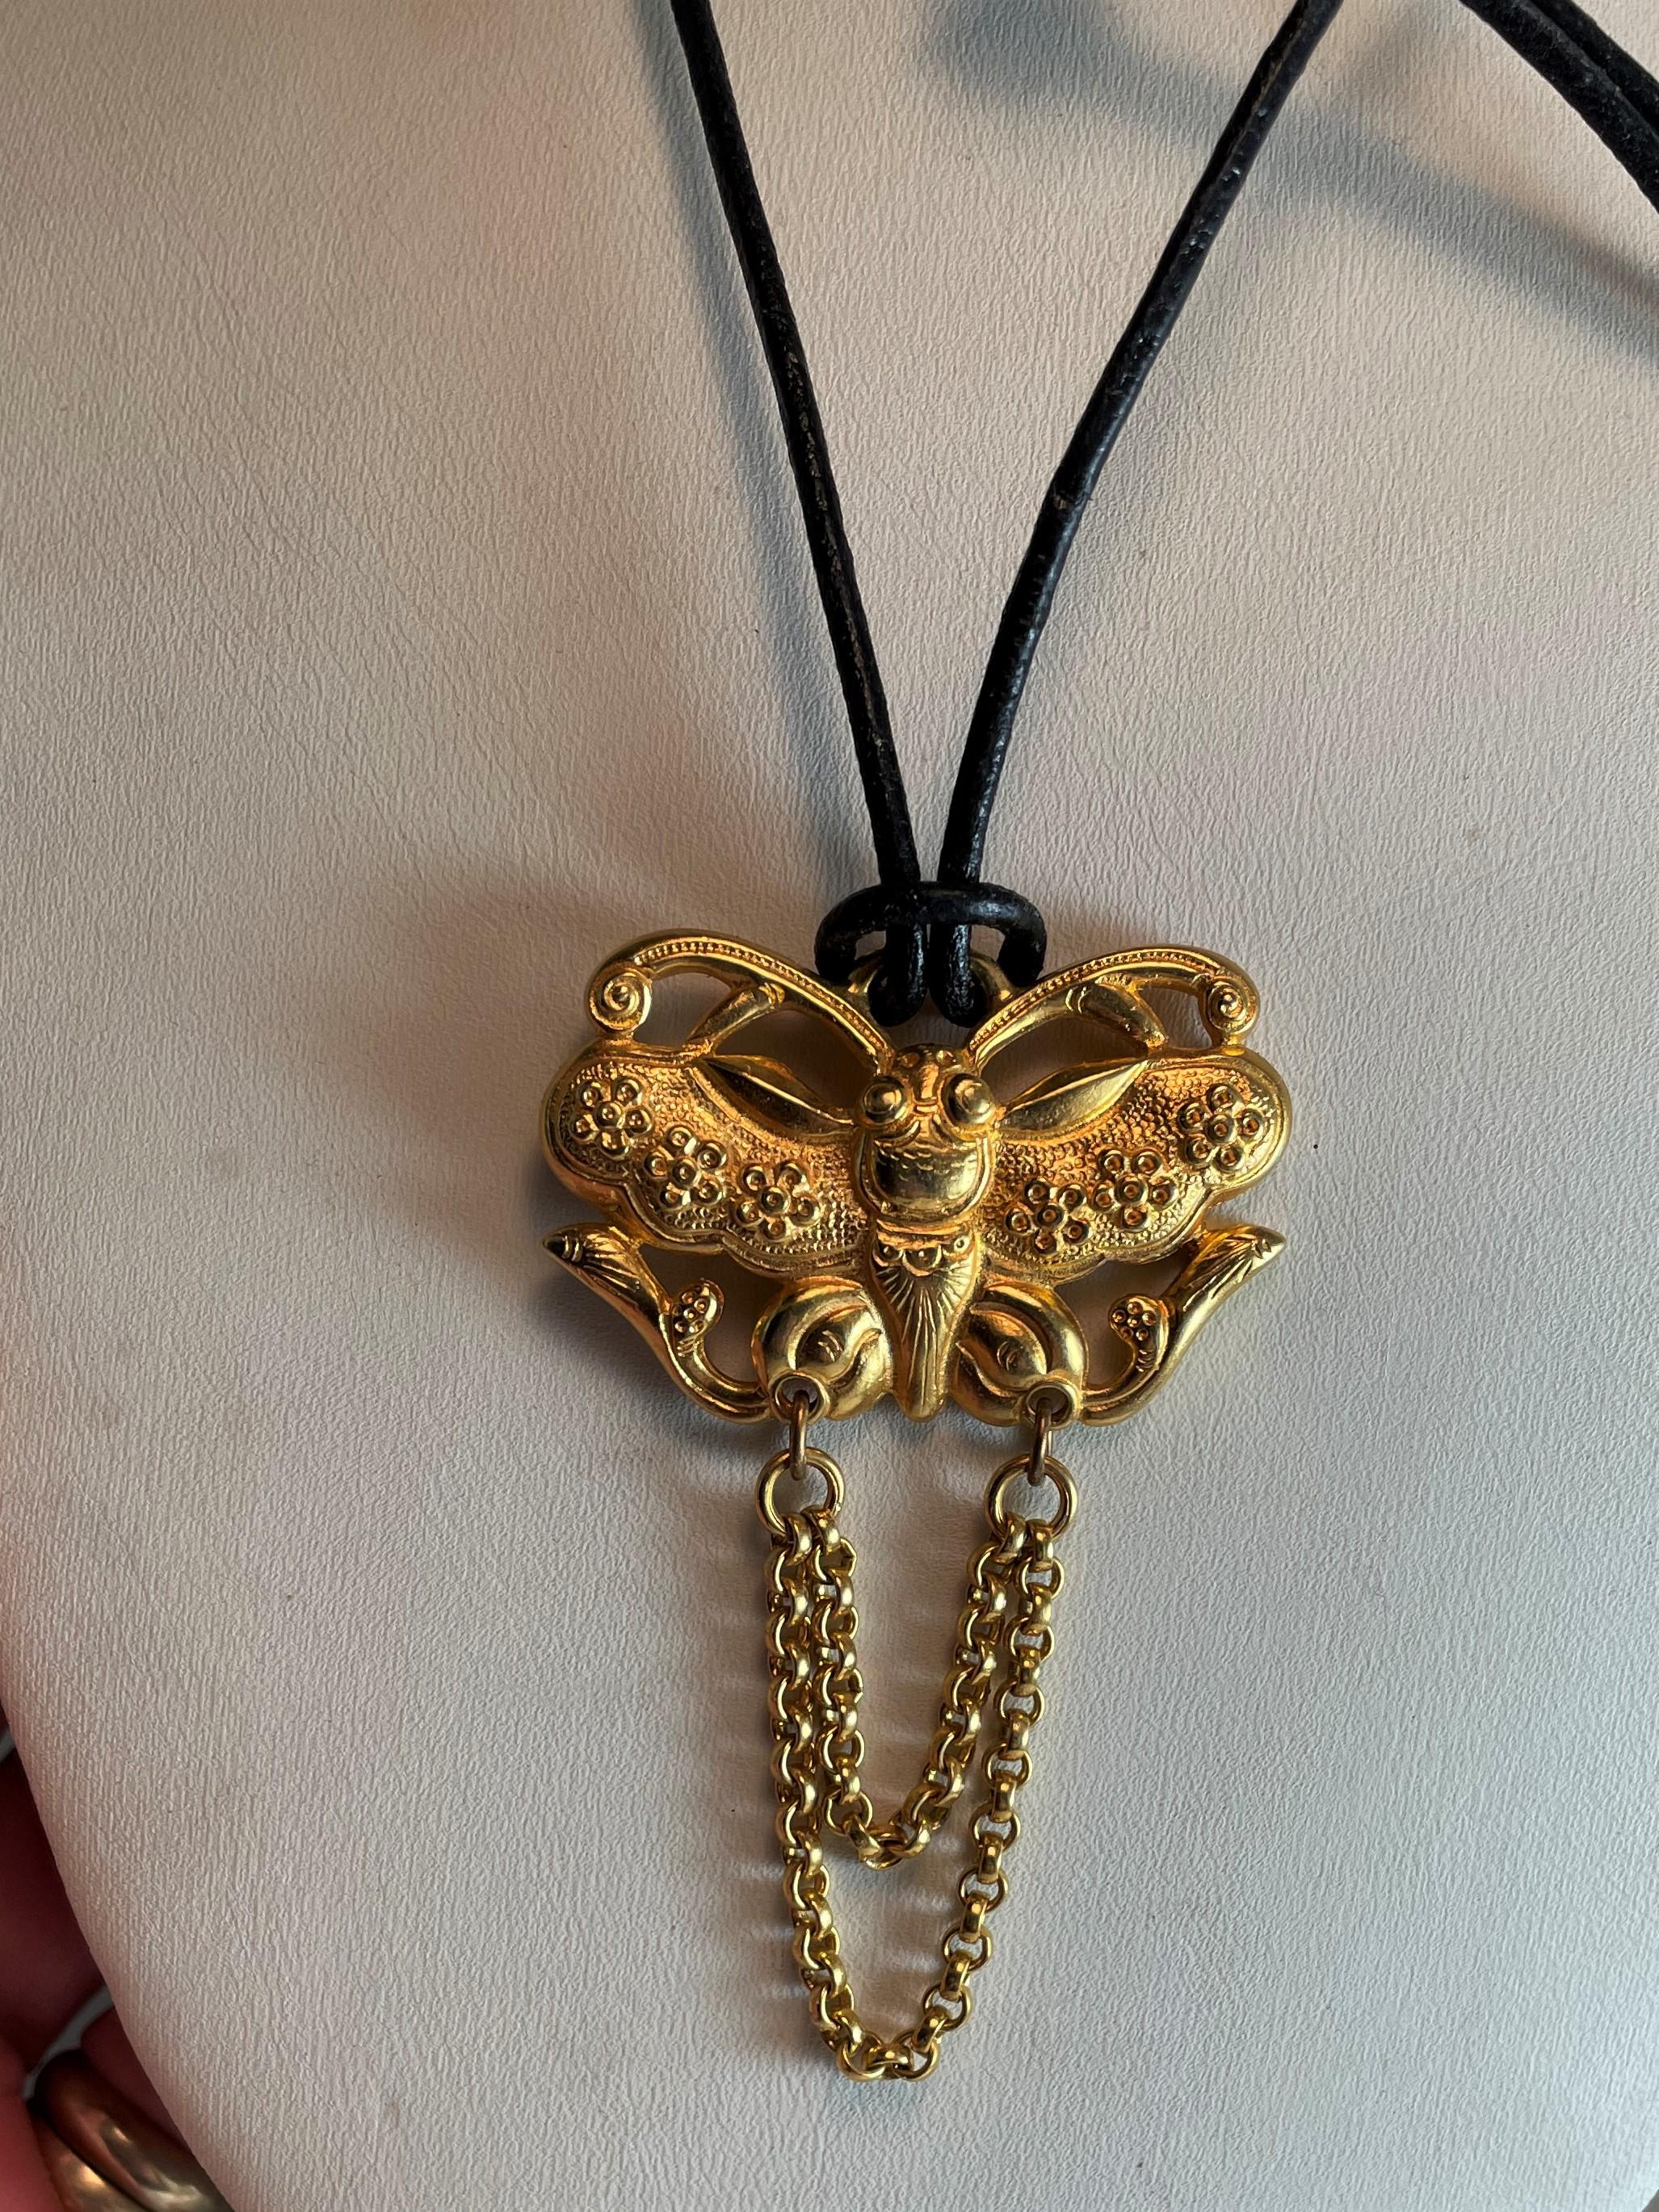 Ben-Amun Stylized Butterfly Gold Tone Pendant on Leather Cord In Excellent Condition For Sale In Clifton Forge, VA